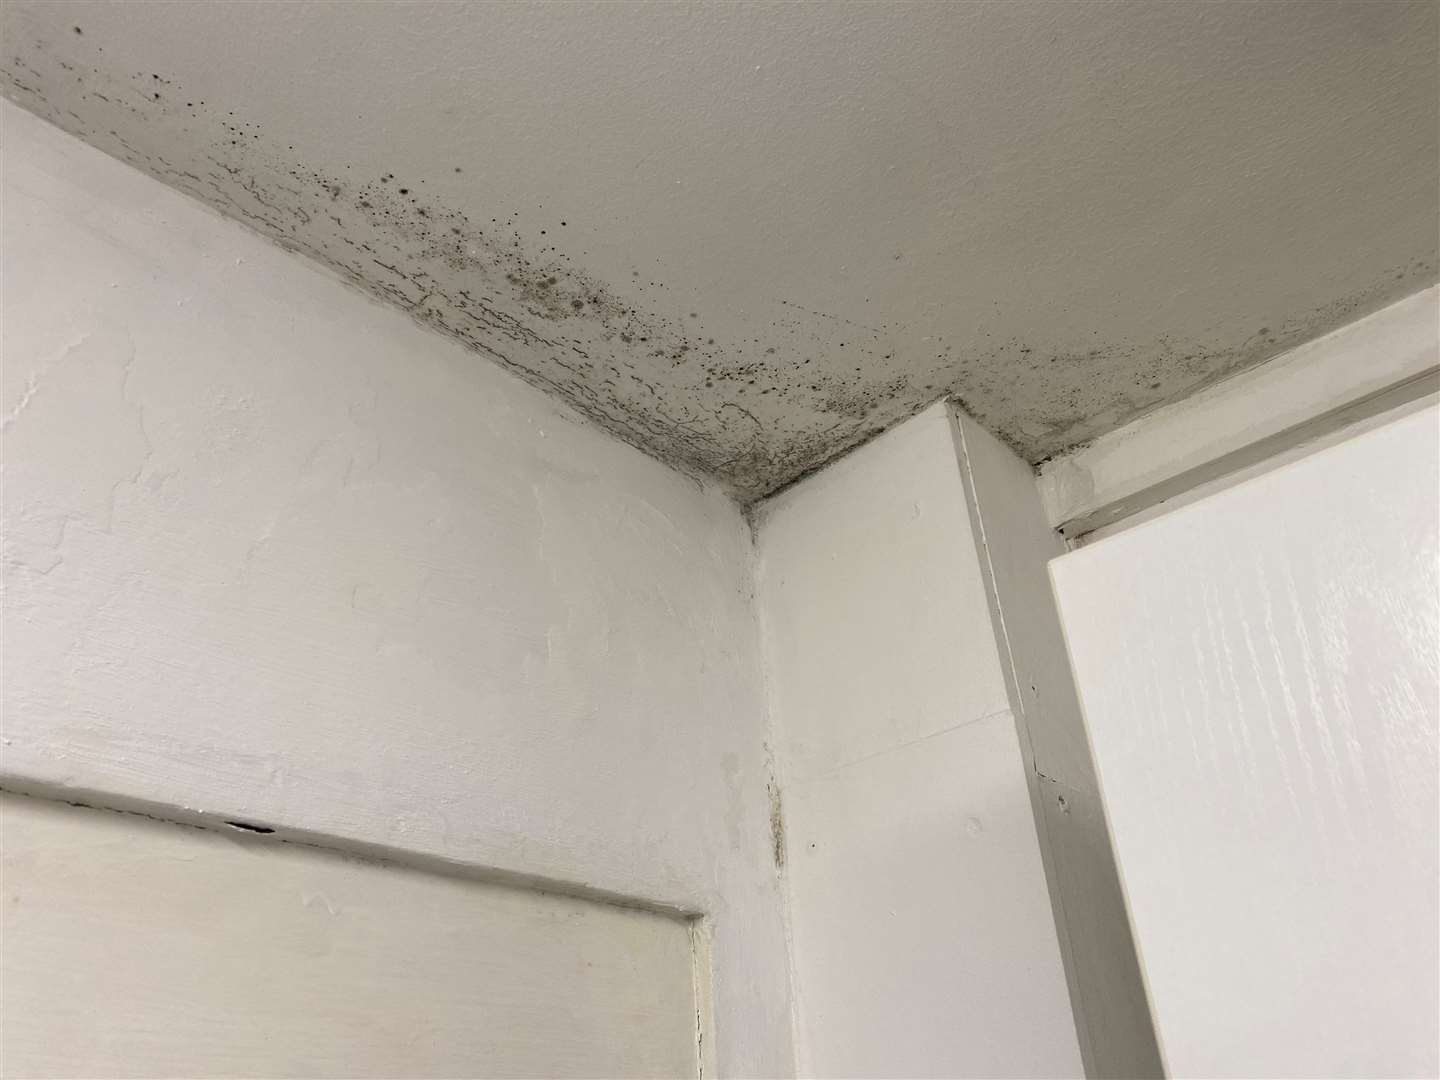 The mould has affected every room in the flat – pictured here is the kitchen